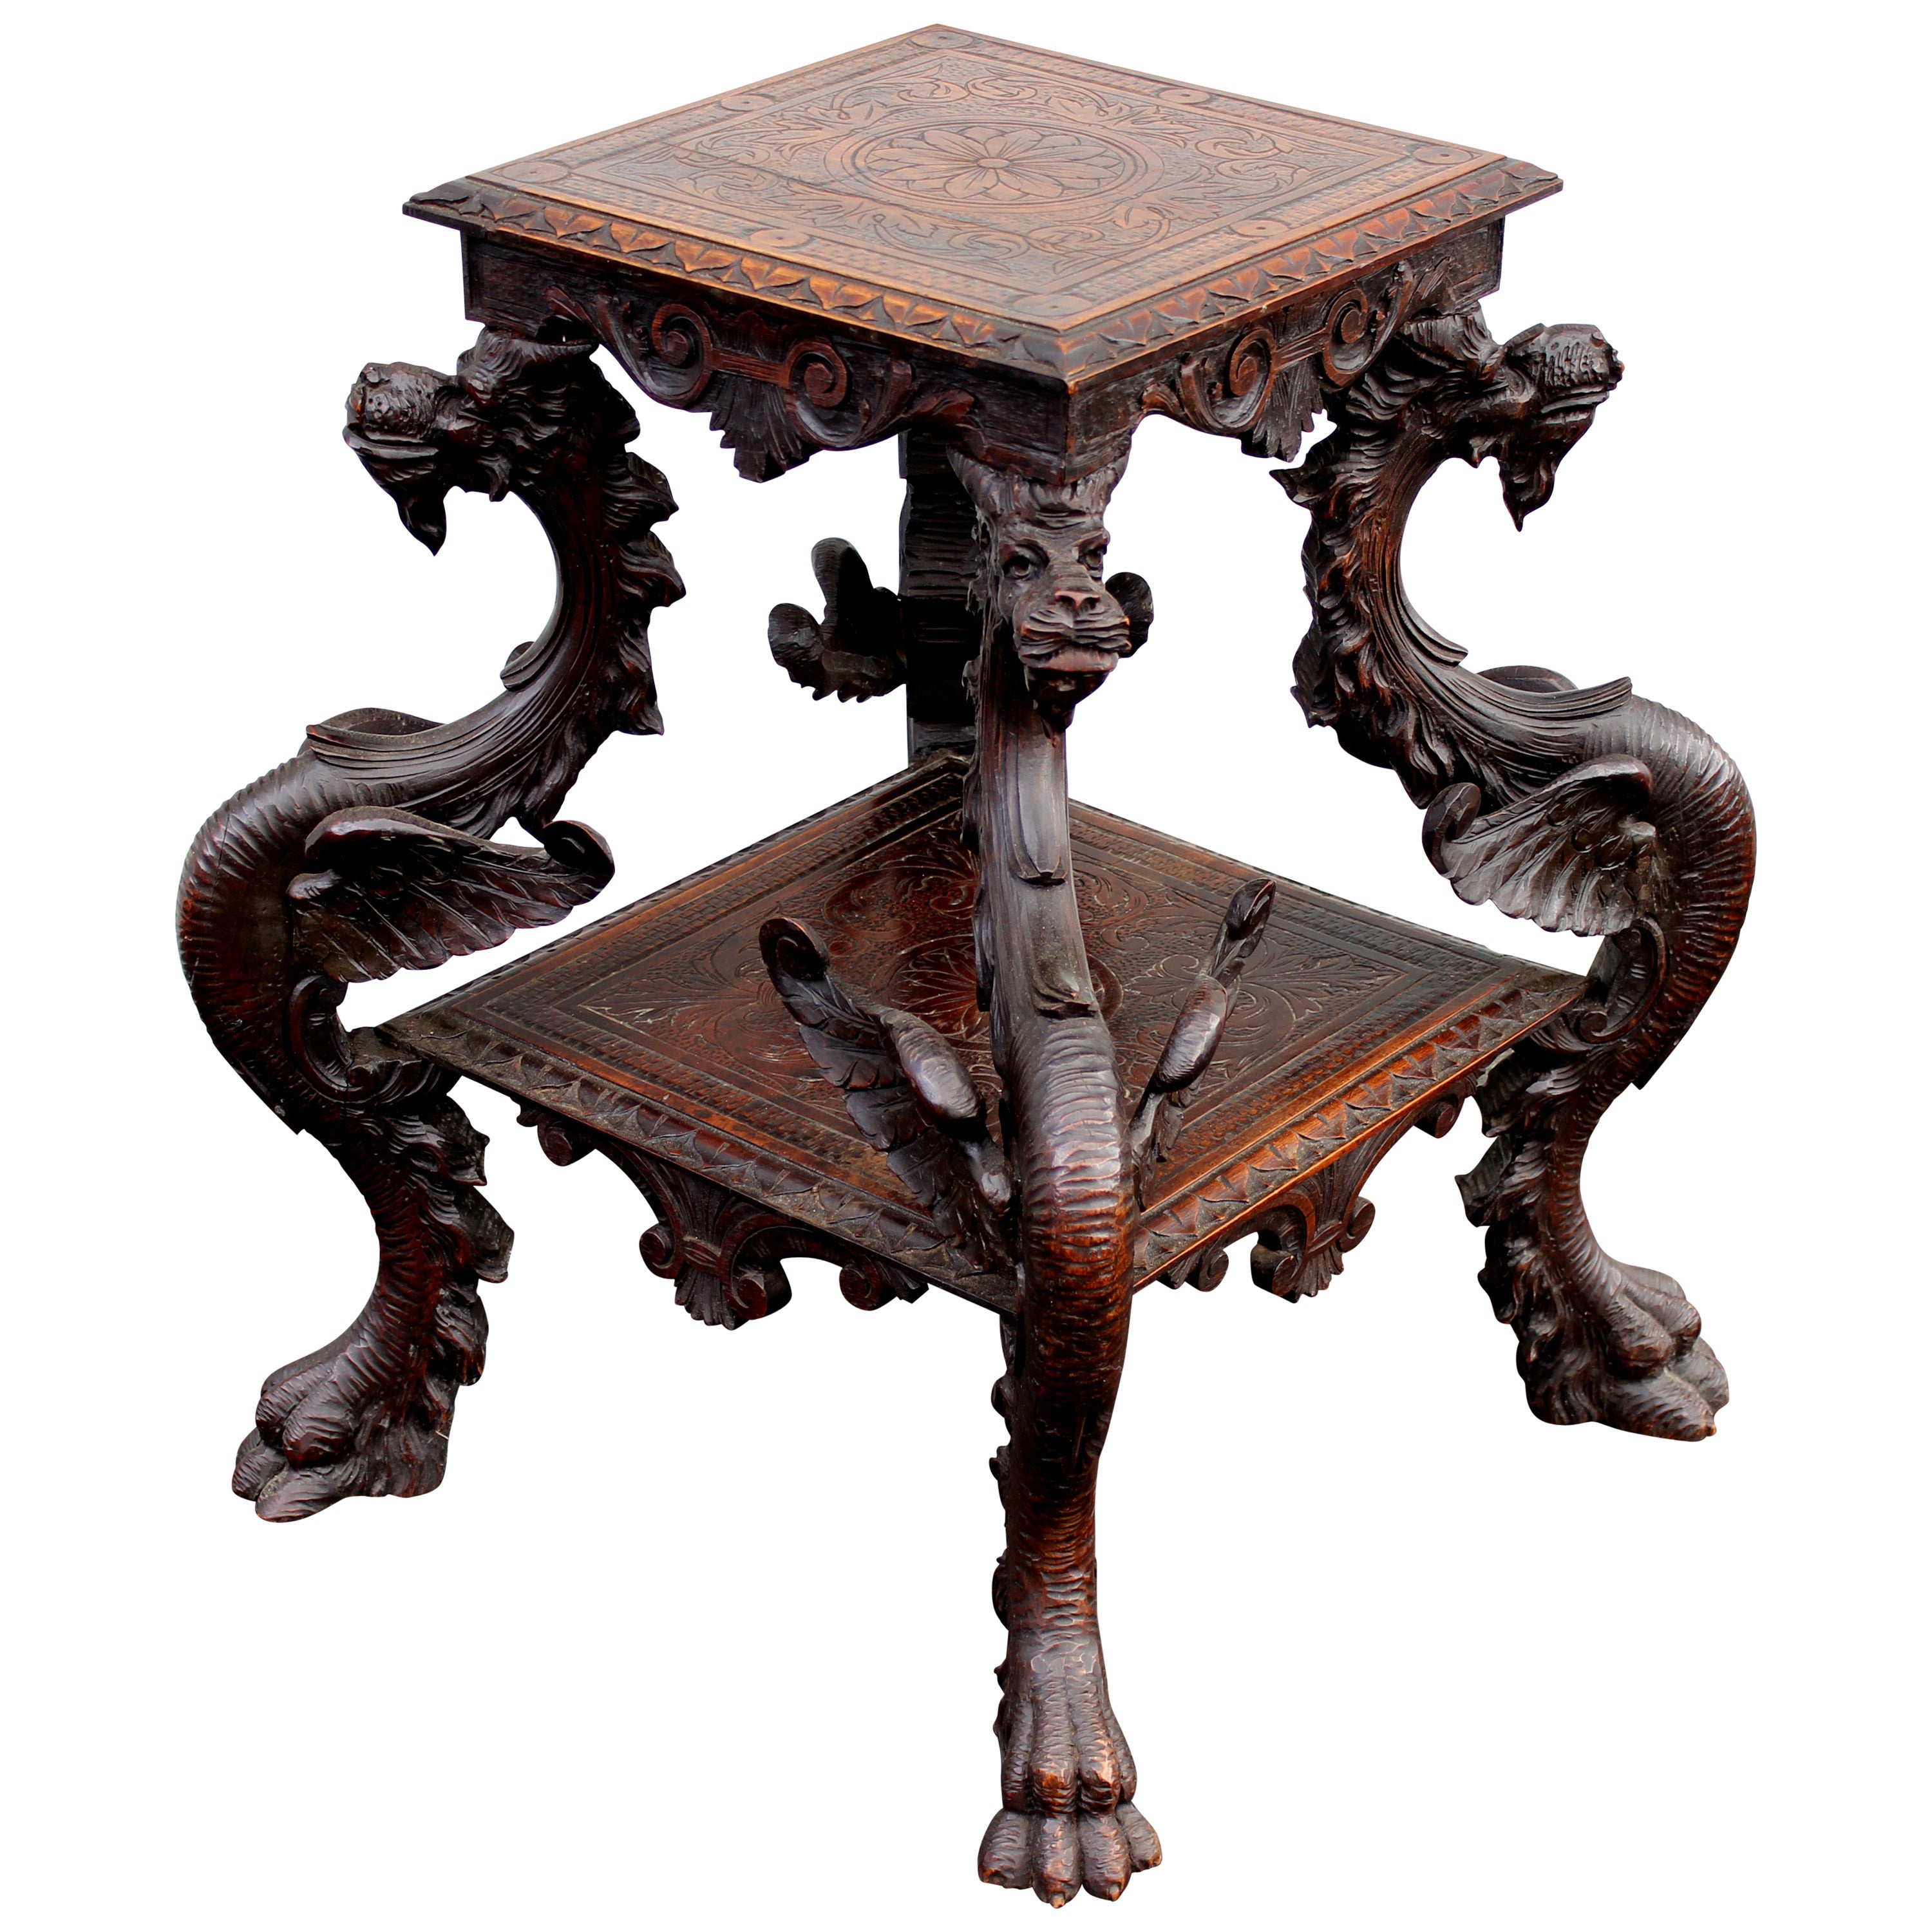 19th Century Continental Carved Tiered Pedestal Table with Dragon Supports